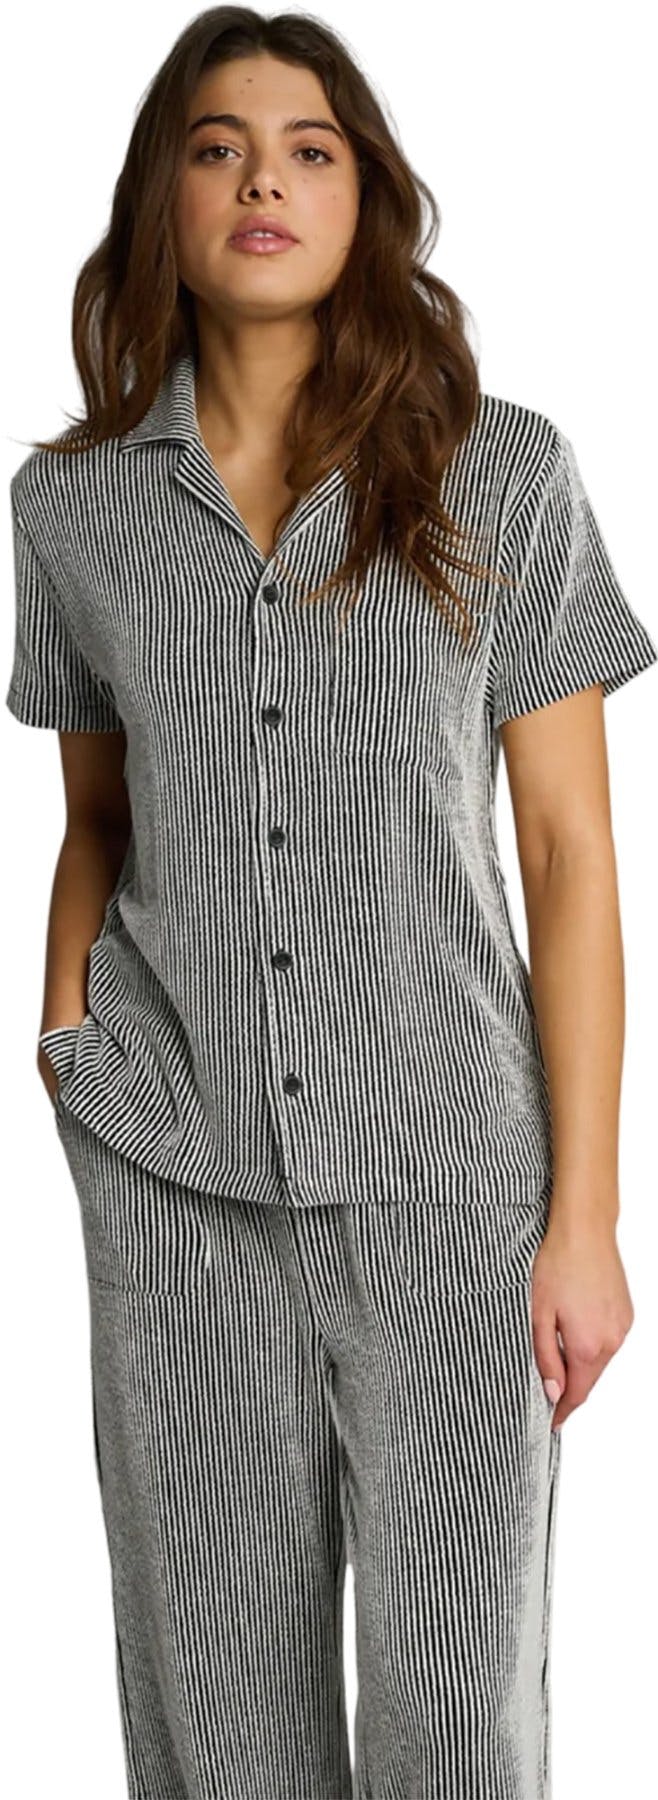 Product image for Recycled Short Sleeve Stripe Shirt - Women's